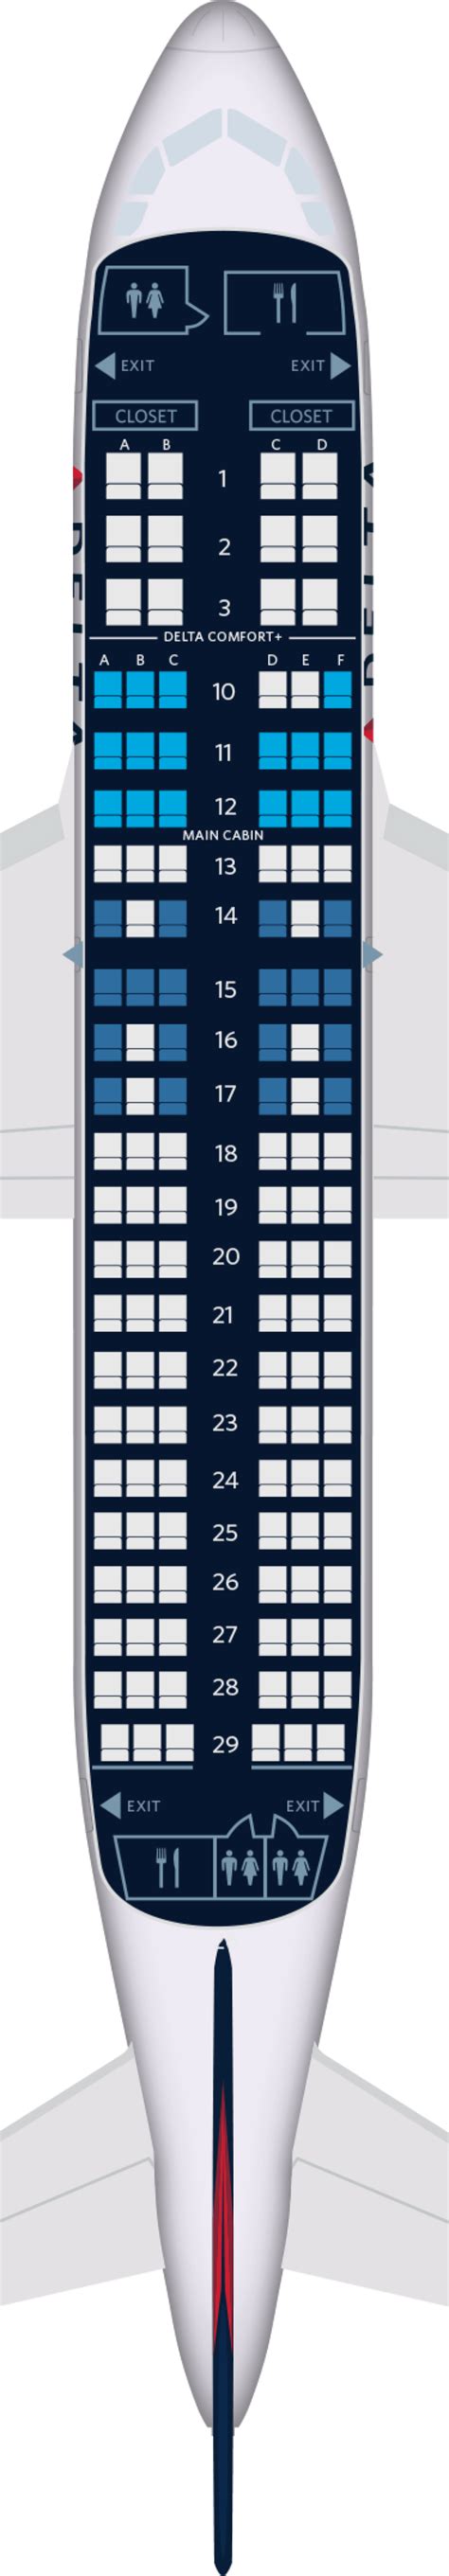 Airbus A319 Delta Seat Map | Elcho Table